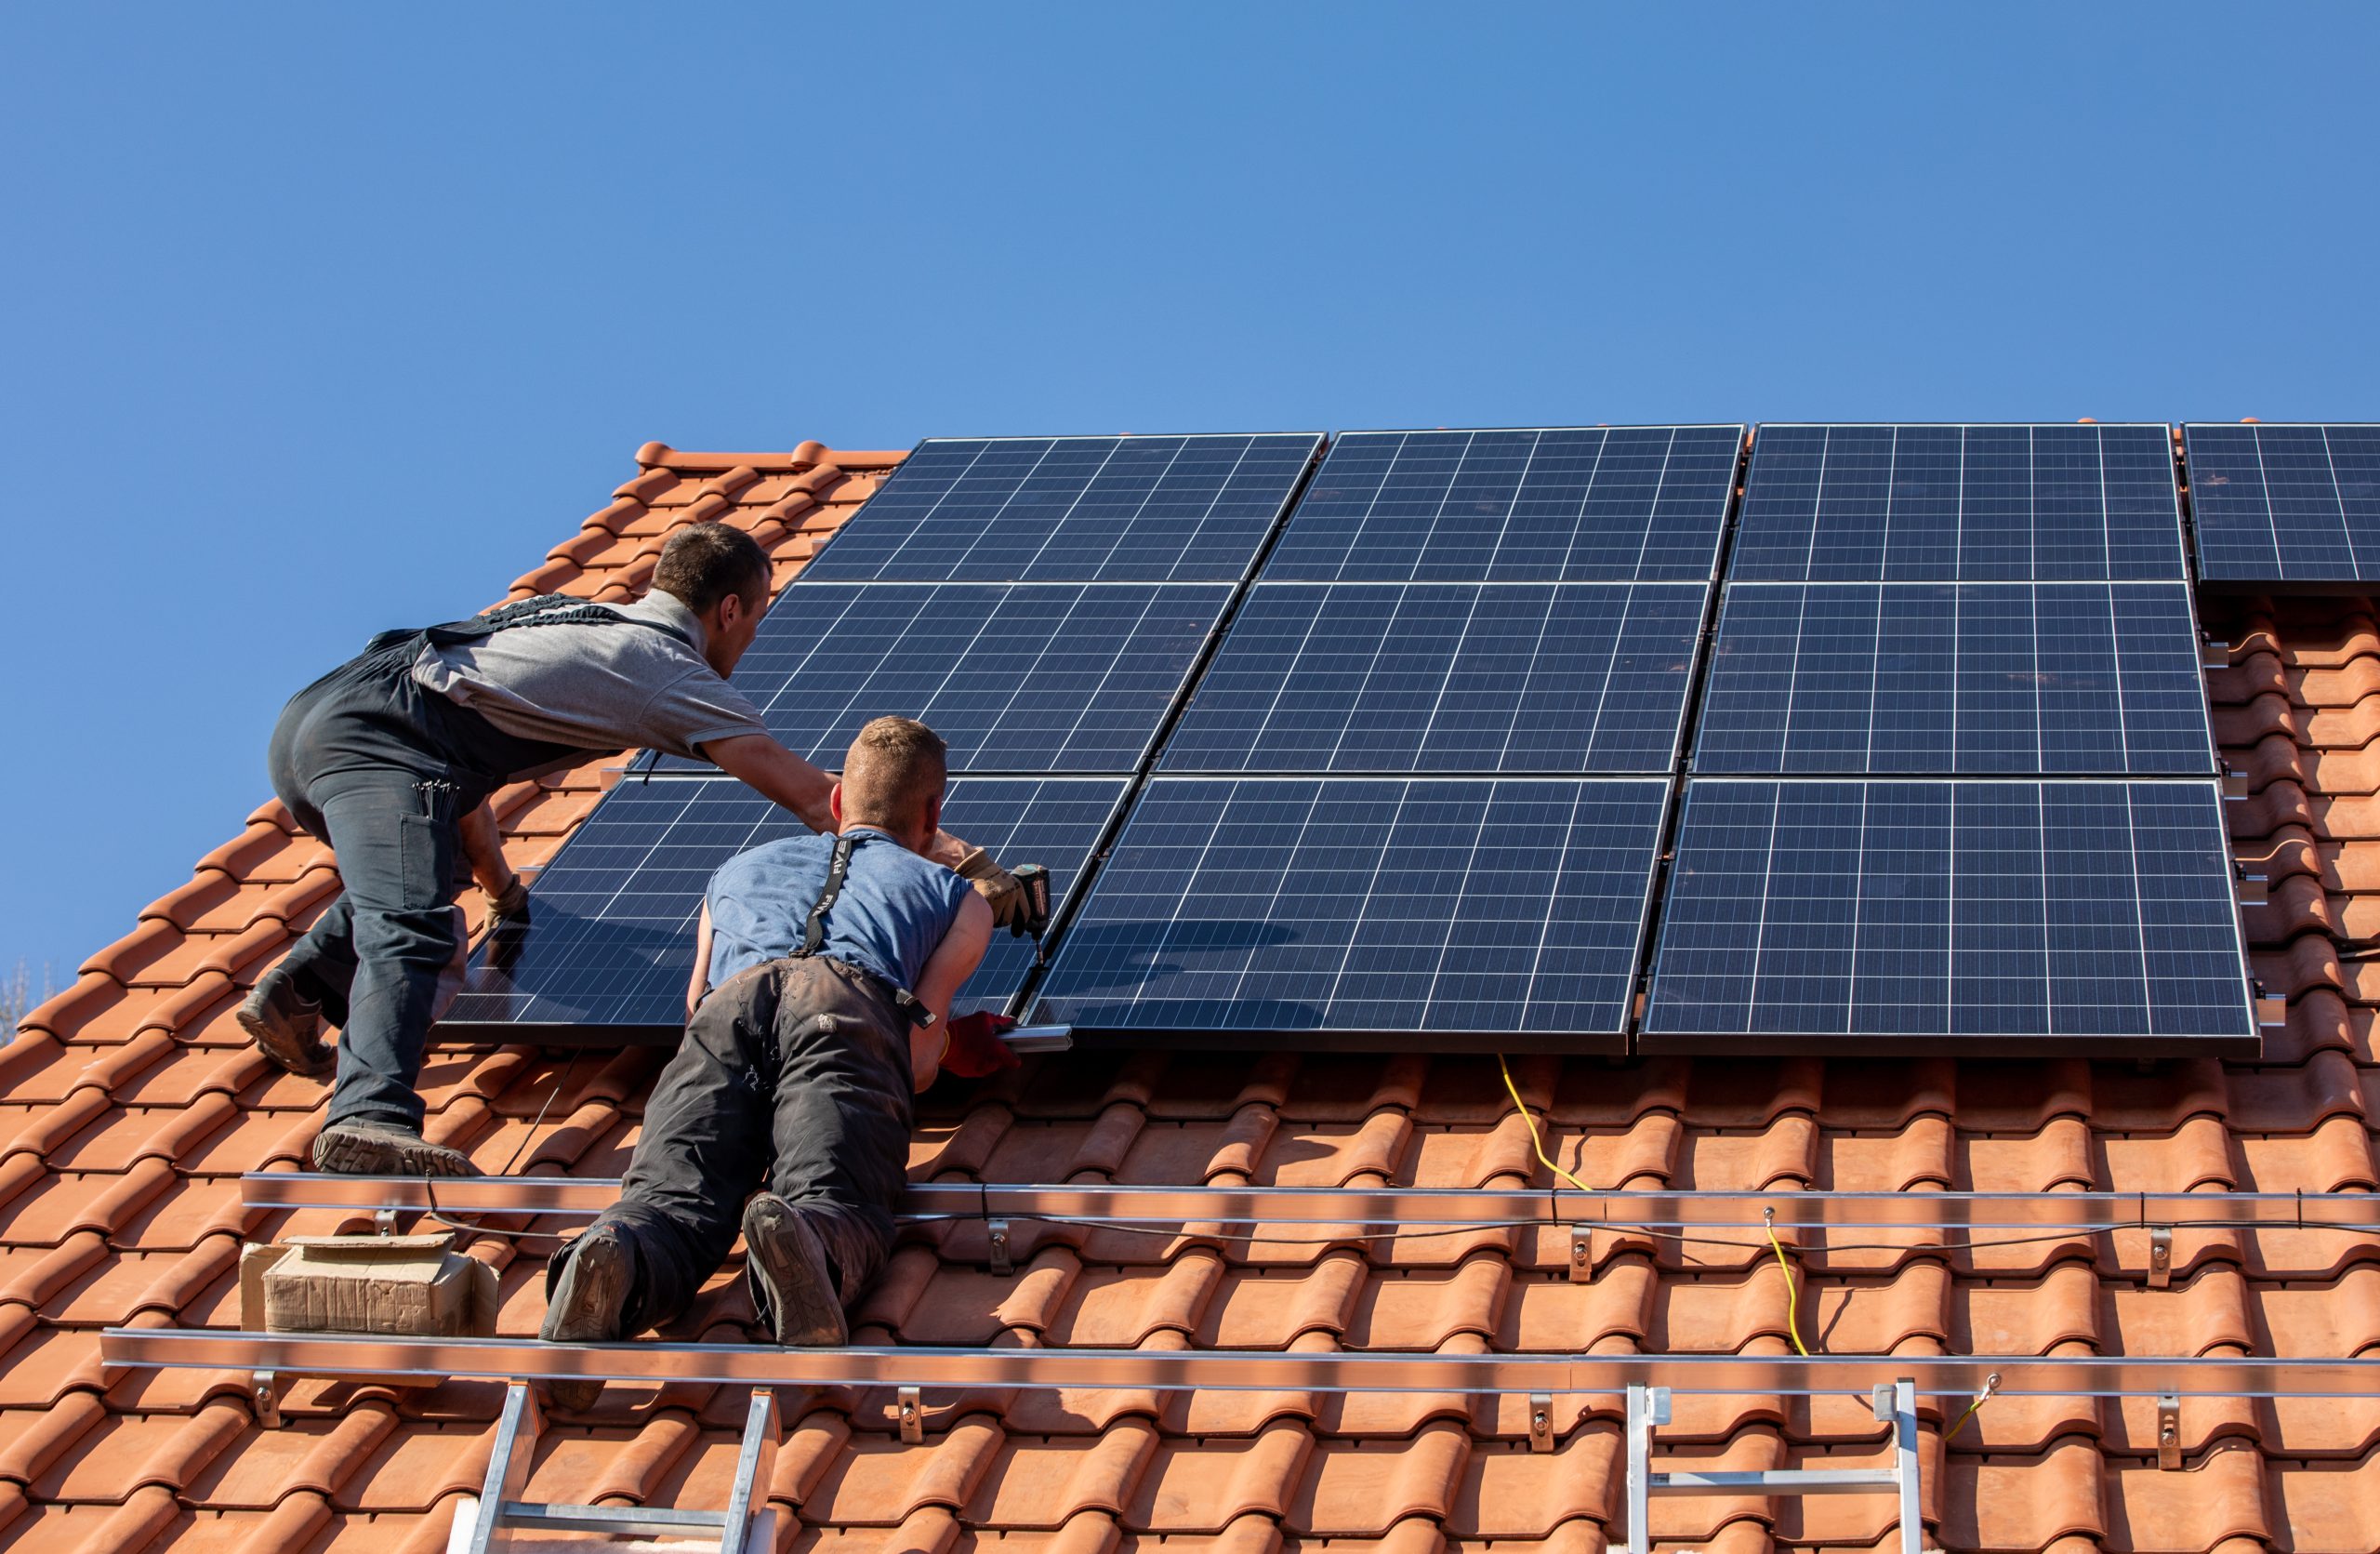 Roof Repairs and Solar Panels for Swindon Social Homes